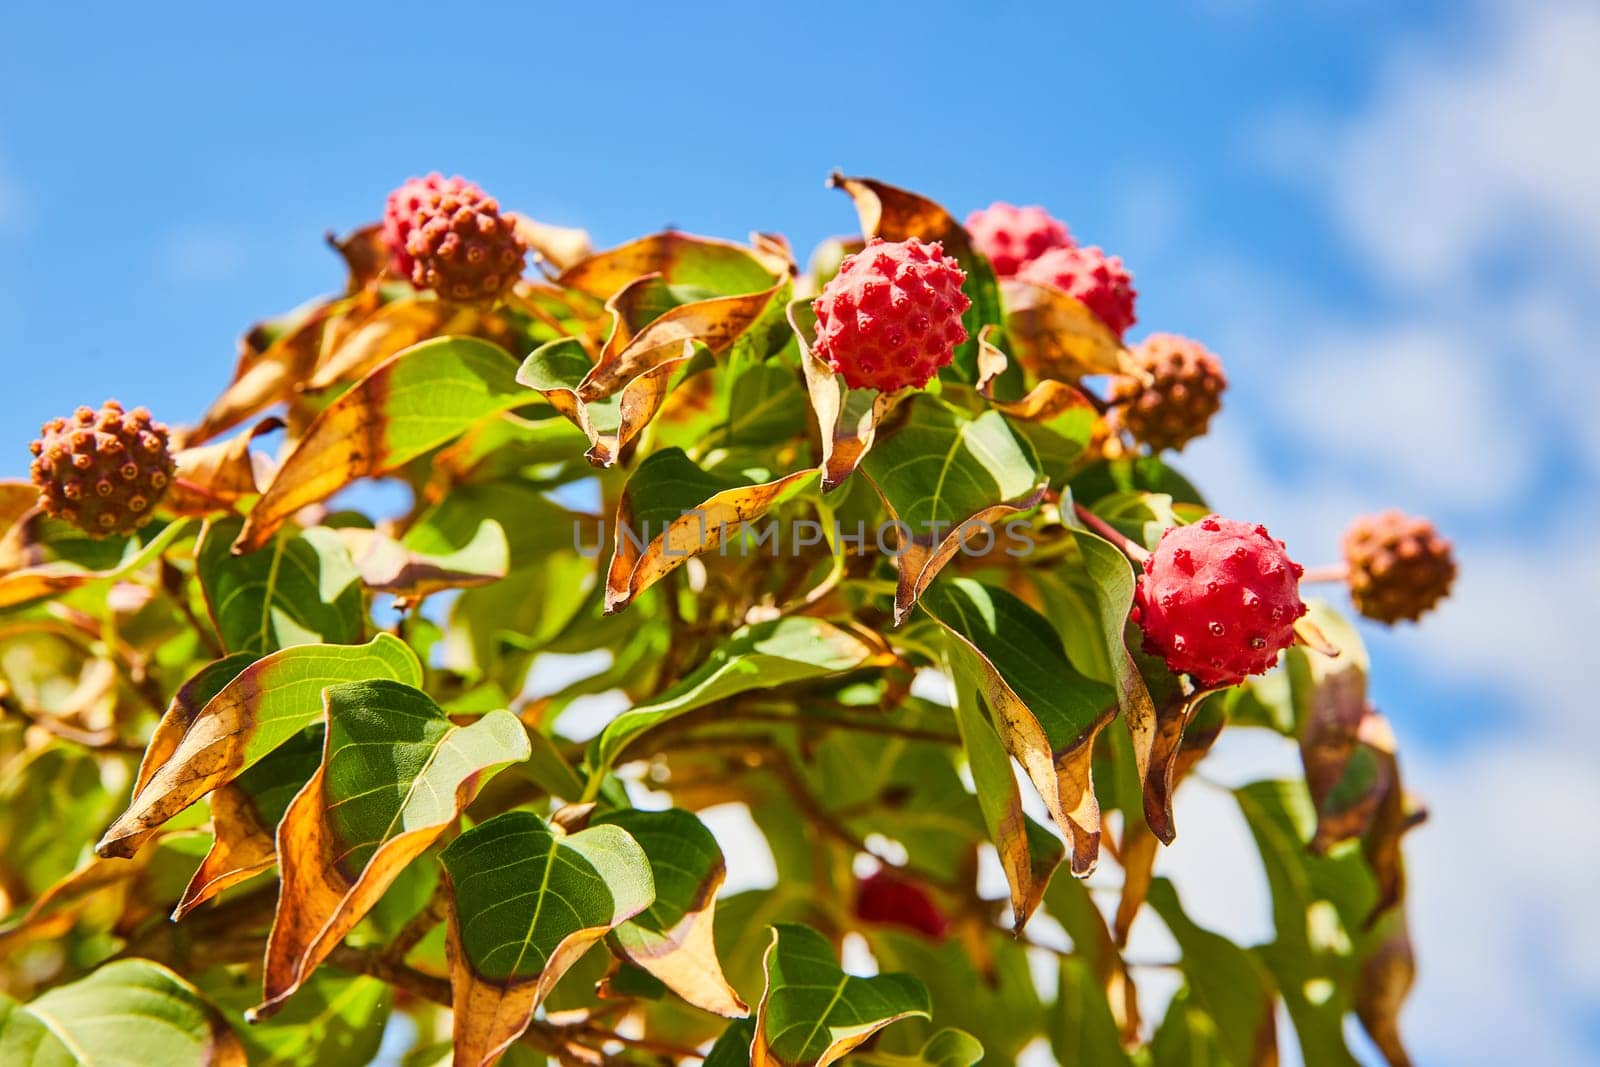 Vibrant Red Berries and Green Leaves Against Blue Sky by njproductions